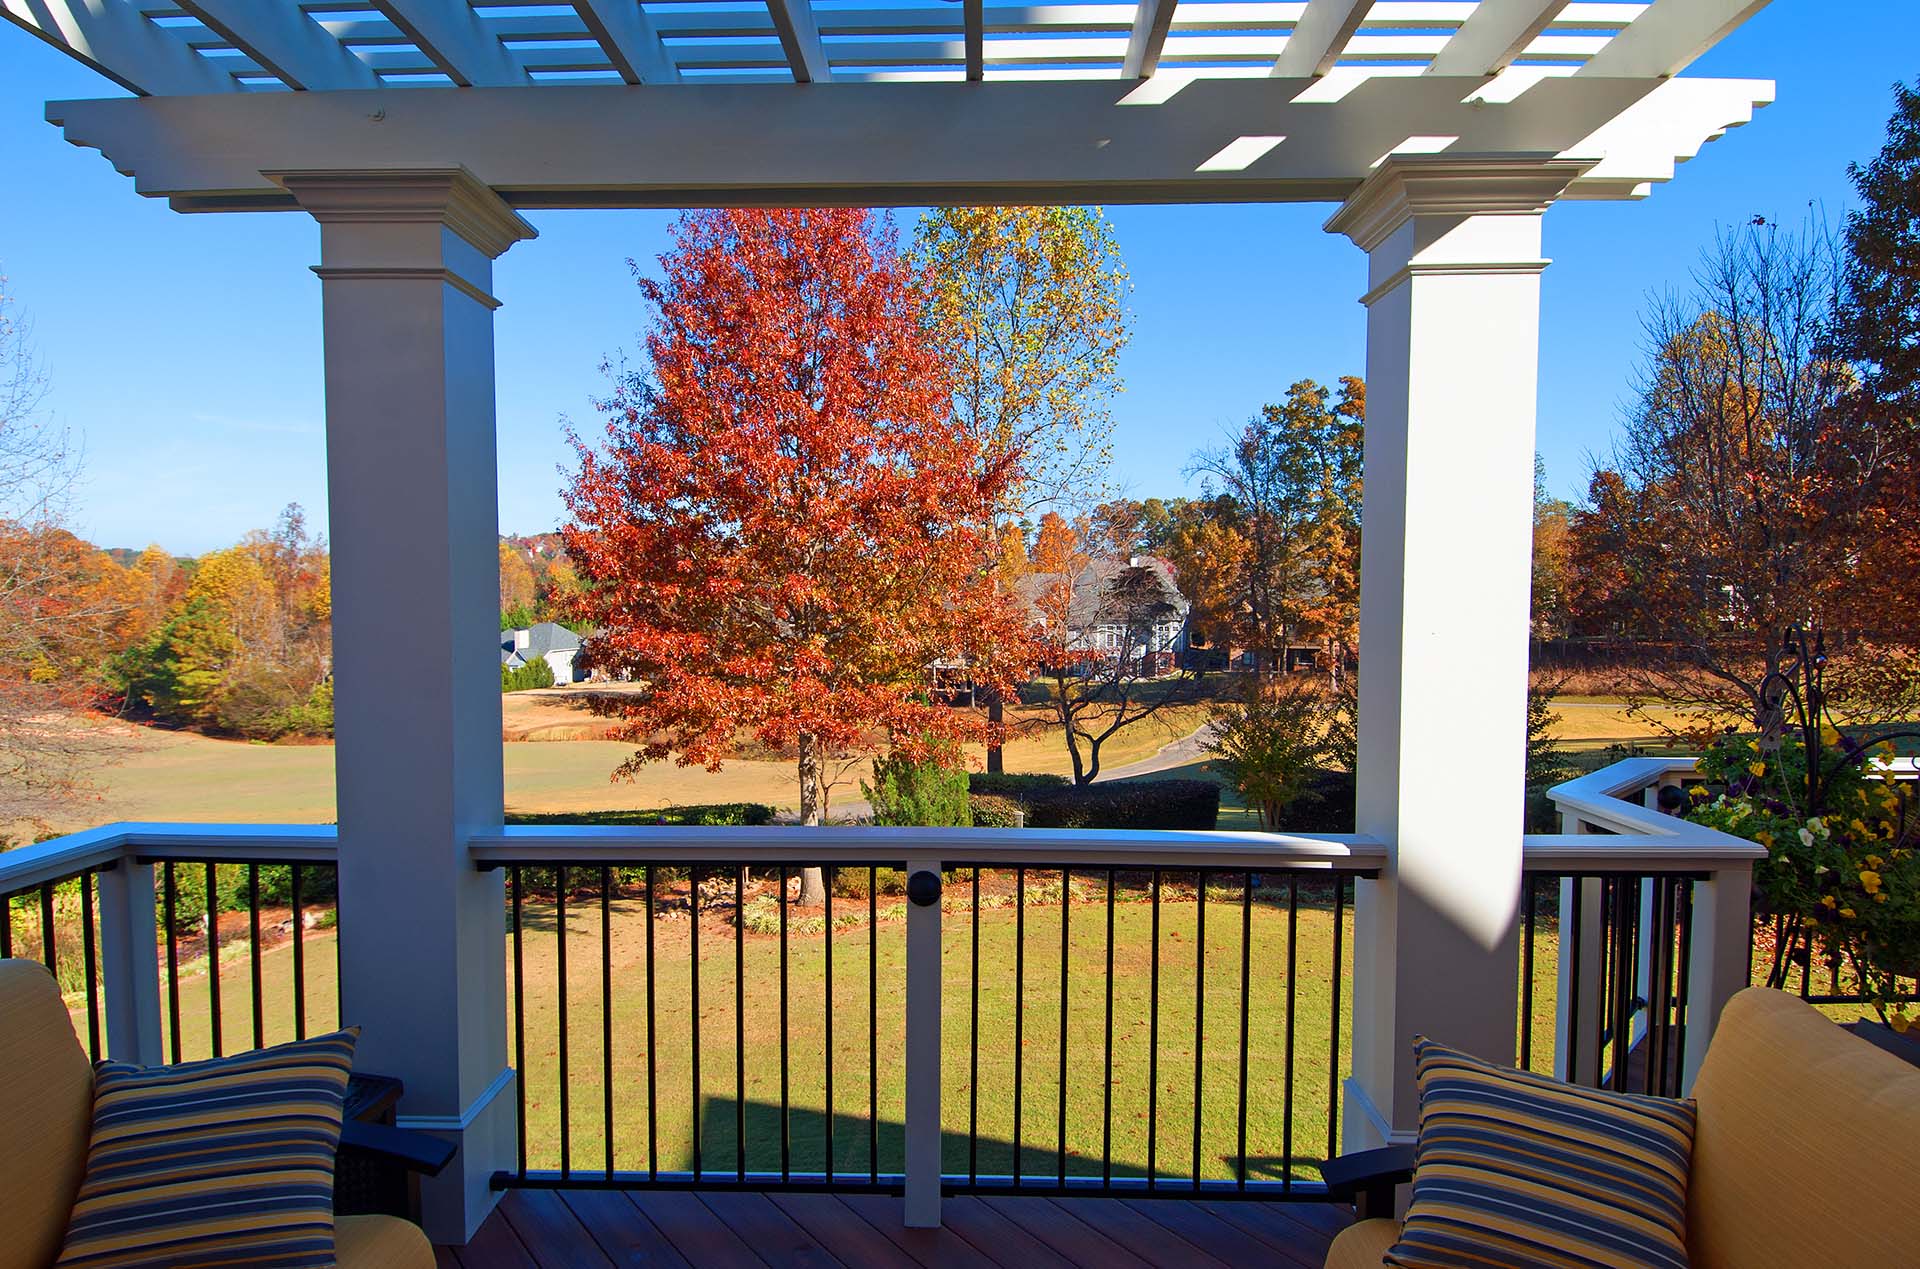 Deck with metal railing overlooking a backyard in autumn.